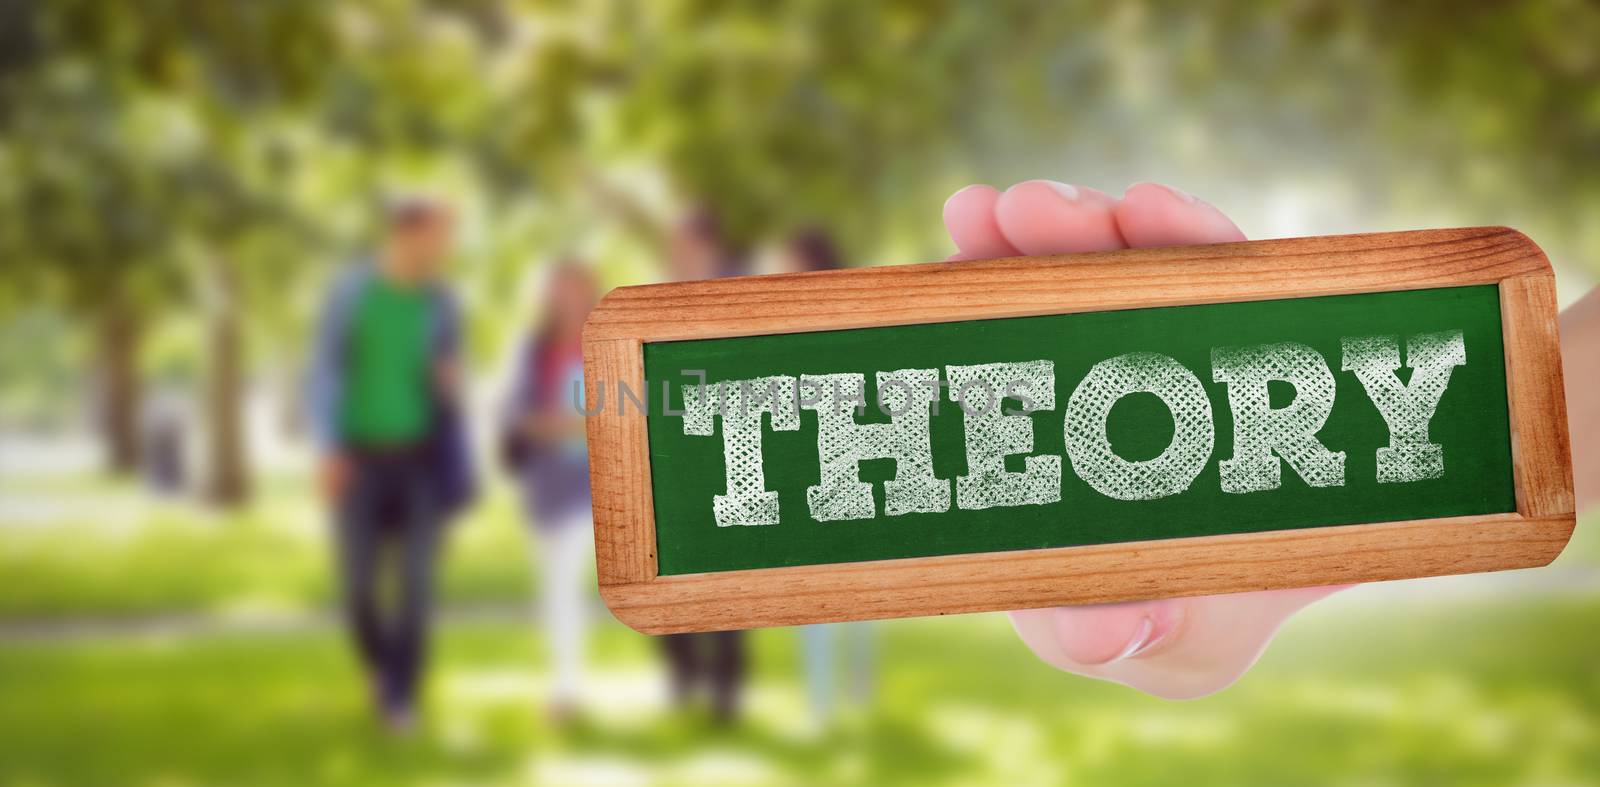 The word theory and hand showing chalkboard against froup of college students walking in the park